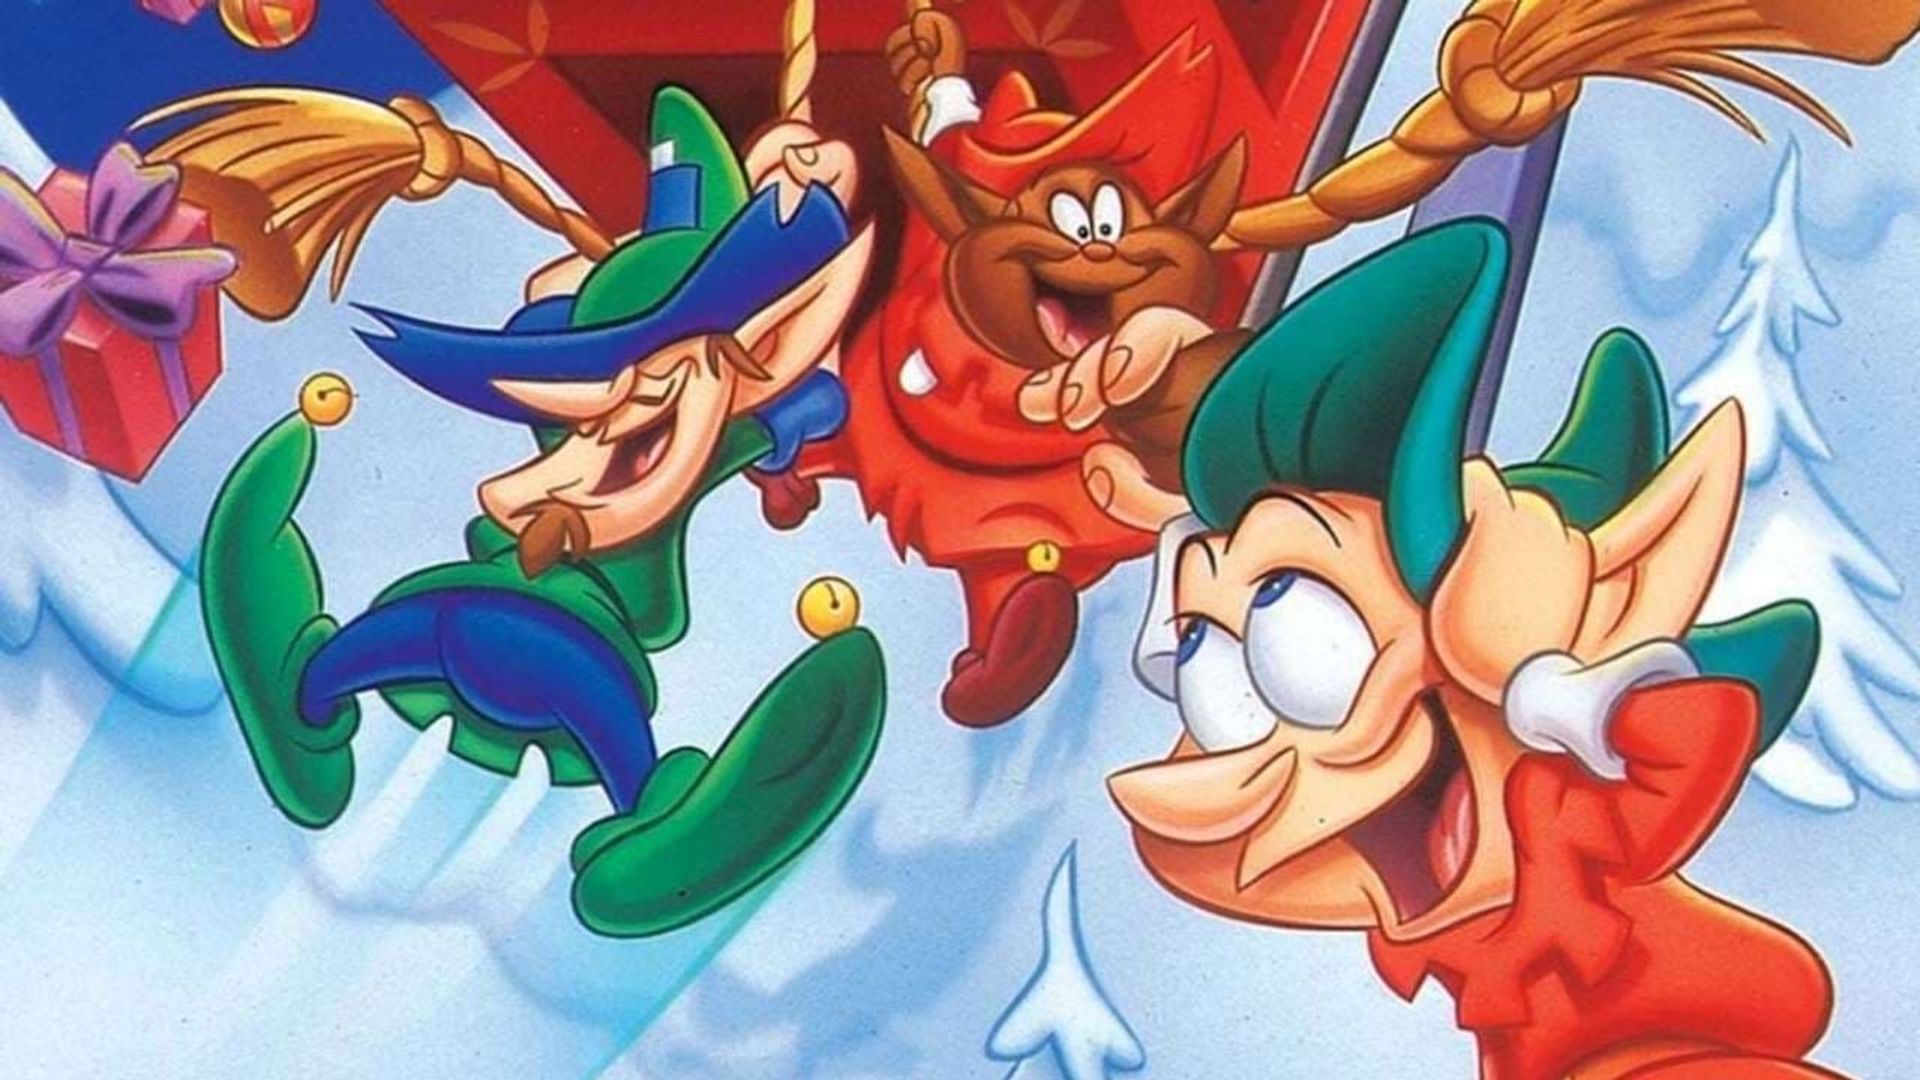 The Christmas Elves background